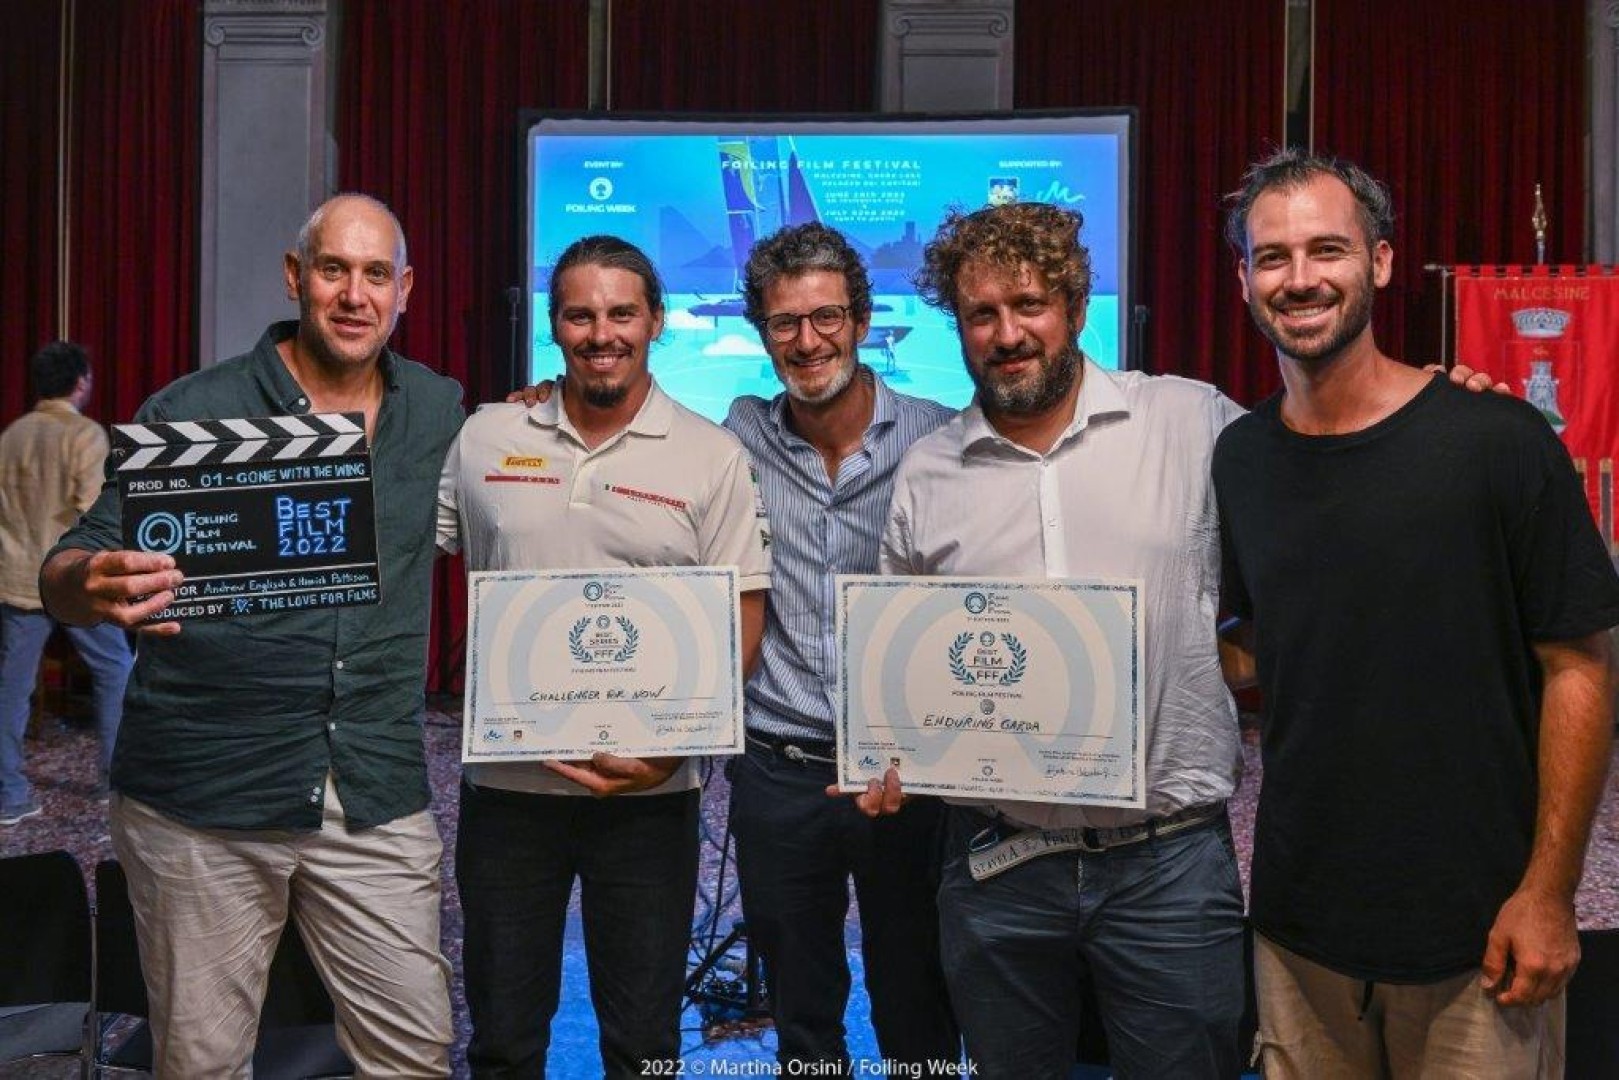 The Foiling Film Festival has found its winners